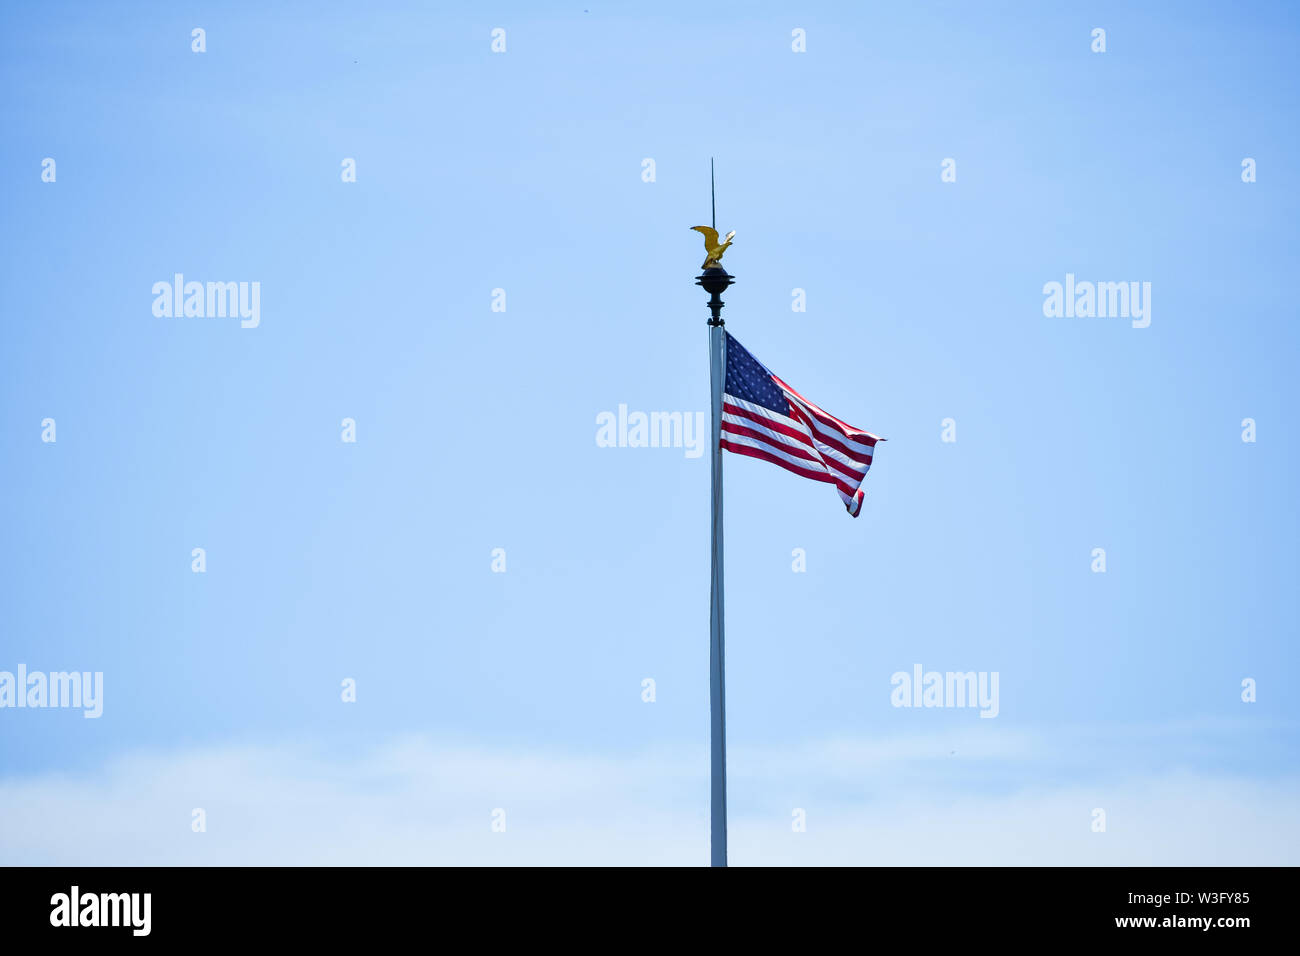 Isolated United States flag waving in the wind in a blue sky background. Copy space for text. Stock Photo